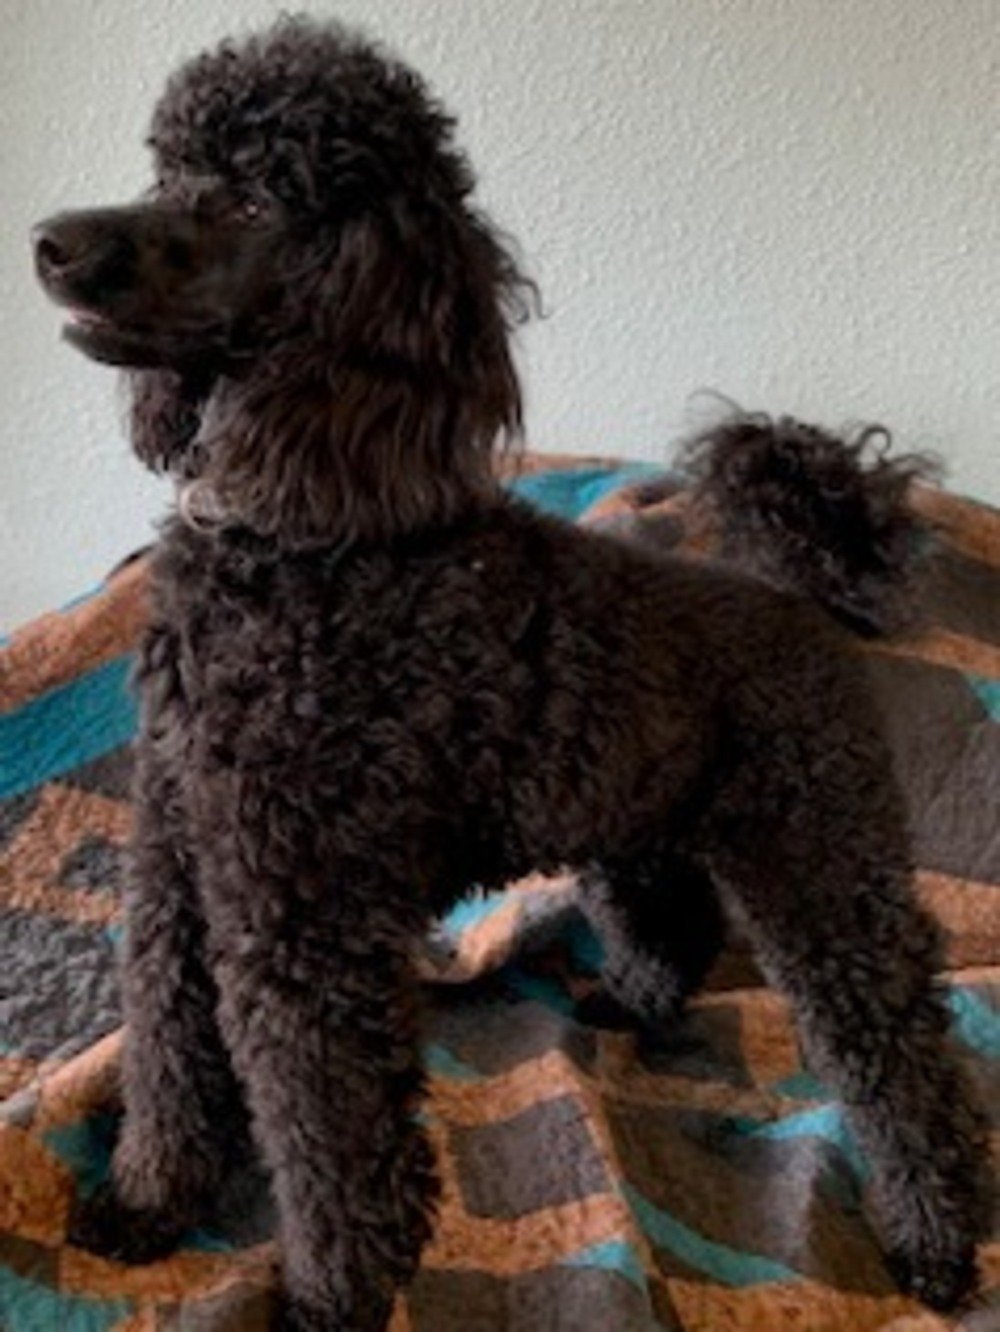 Beautiful black Miniuture poodle on a black teal and brown quilt